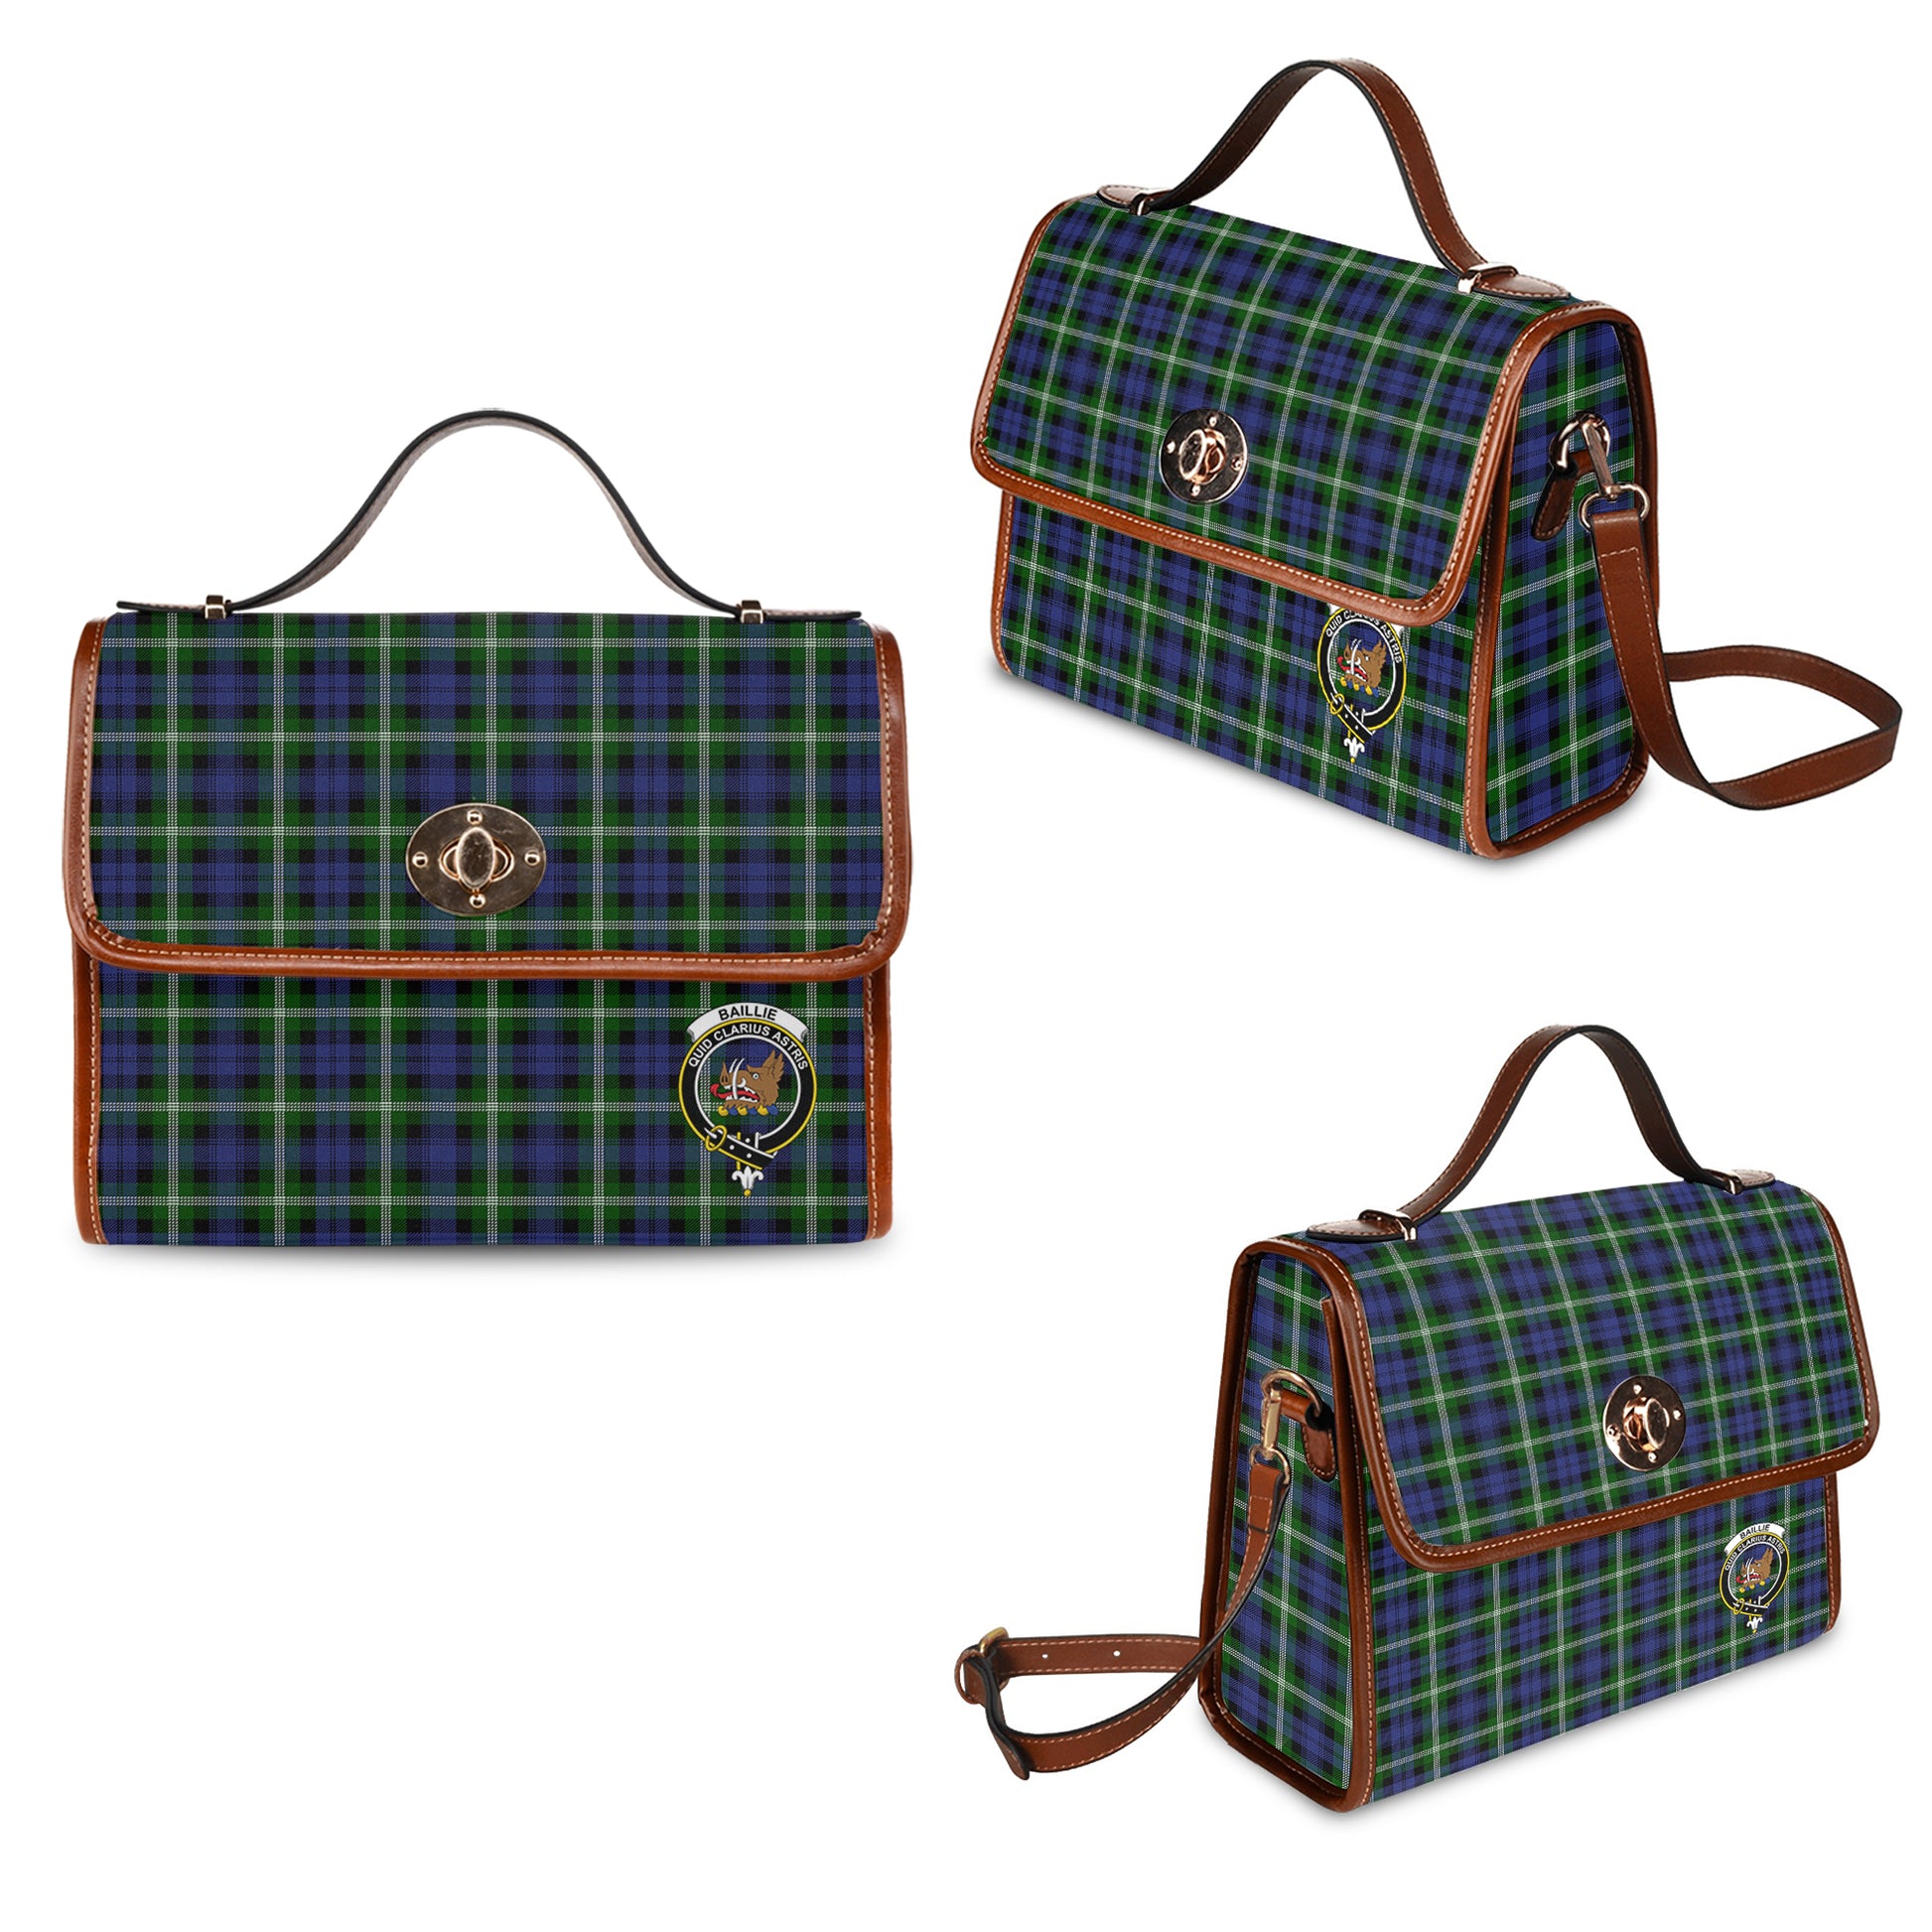 Baillie Modern Tartan Leather Strap Waterproof Canvas Bag with Family Crest One Size 34cm * 42cm (13.4" x 16.5") - Tartanvibesclothing